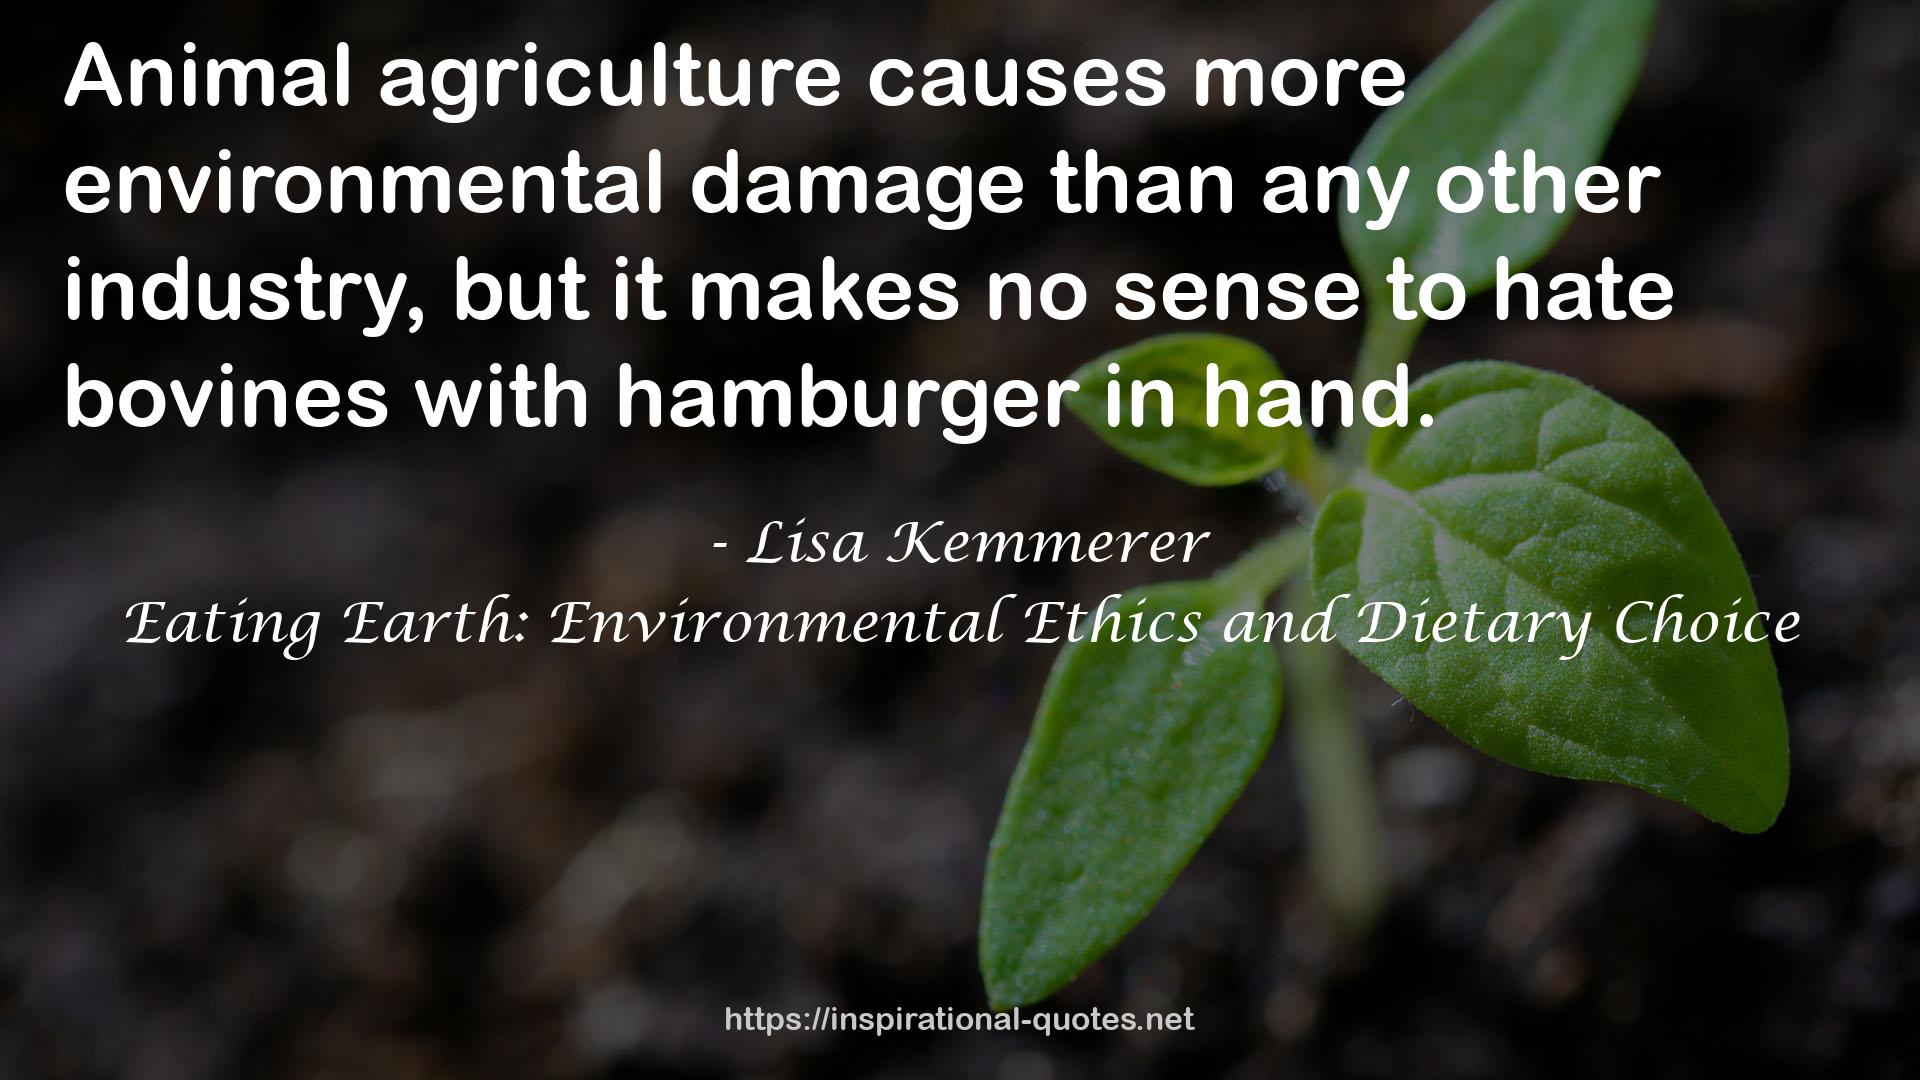 Eating Earth: Environmental Ethics and Dietary Choice QUOTES